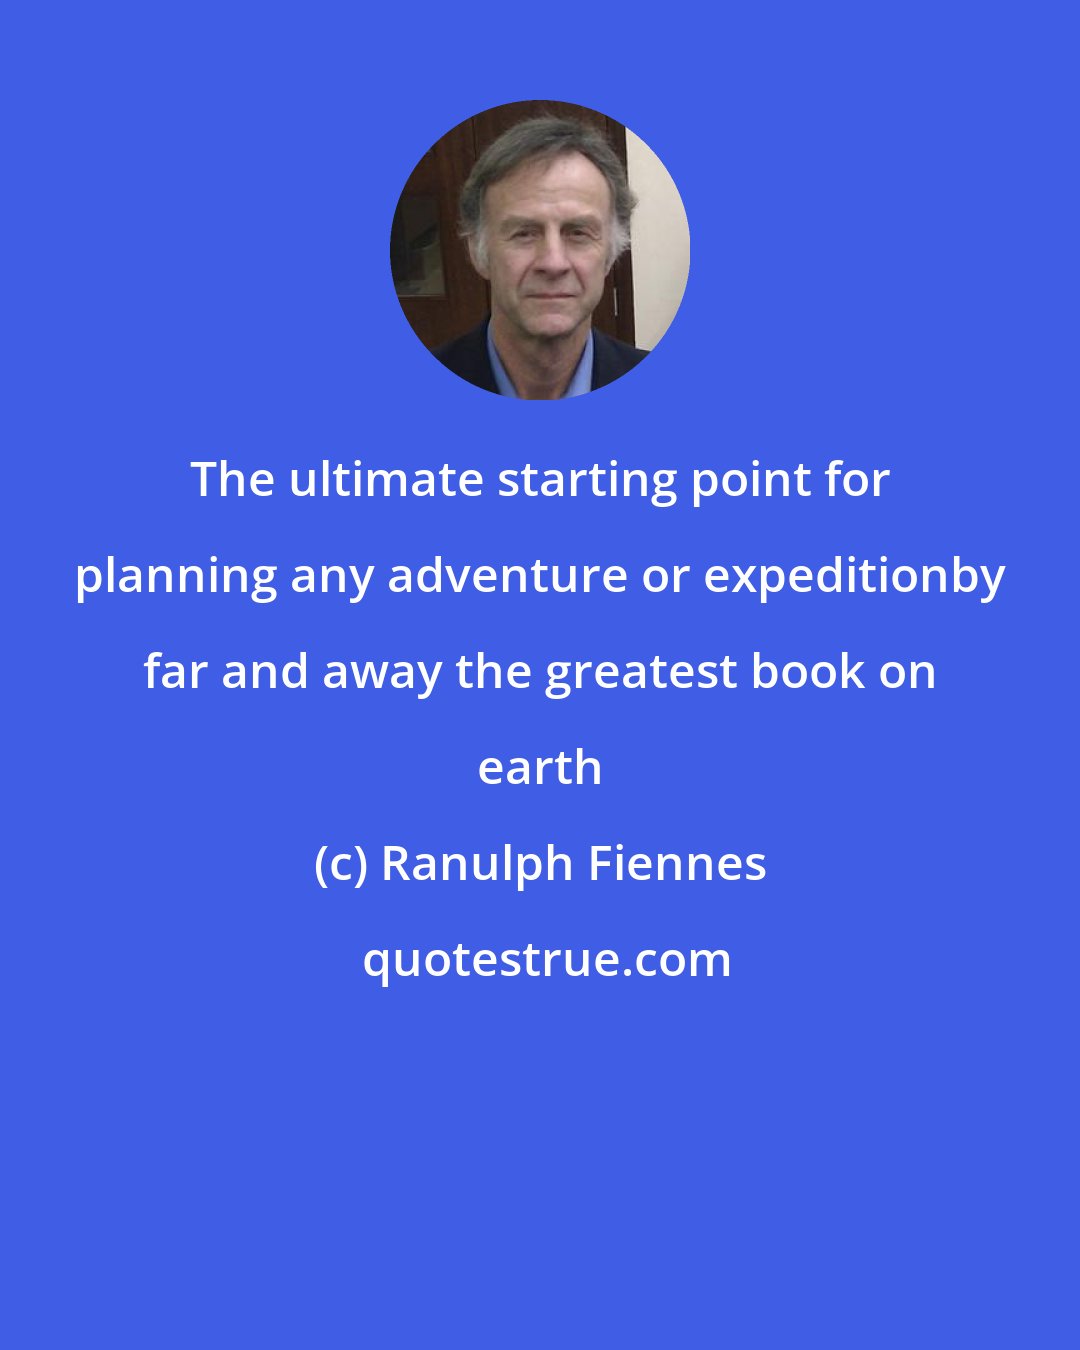 Ranulph Fiennes: The ultimate starting point for planning any adventure or expeditionby far and away the greatest book on earth